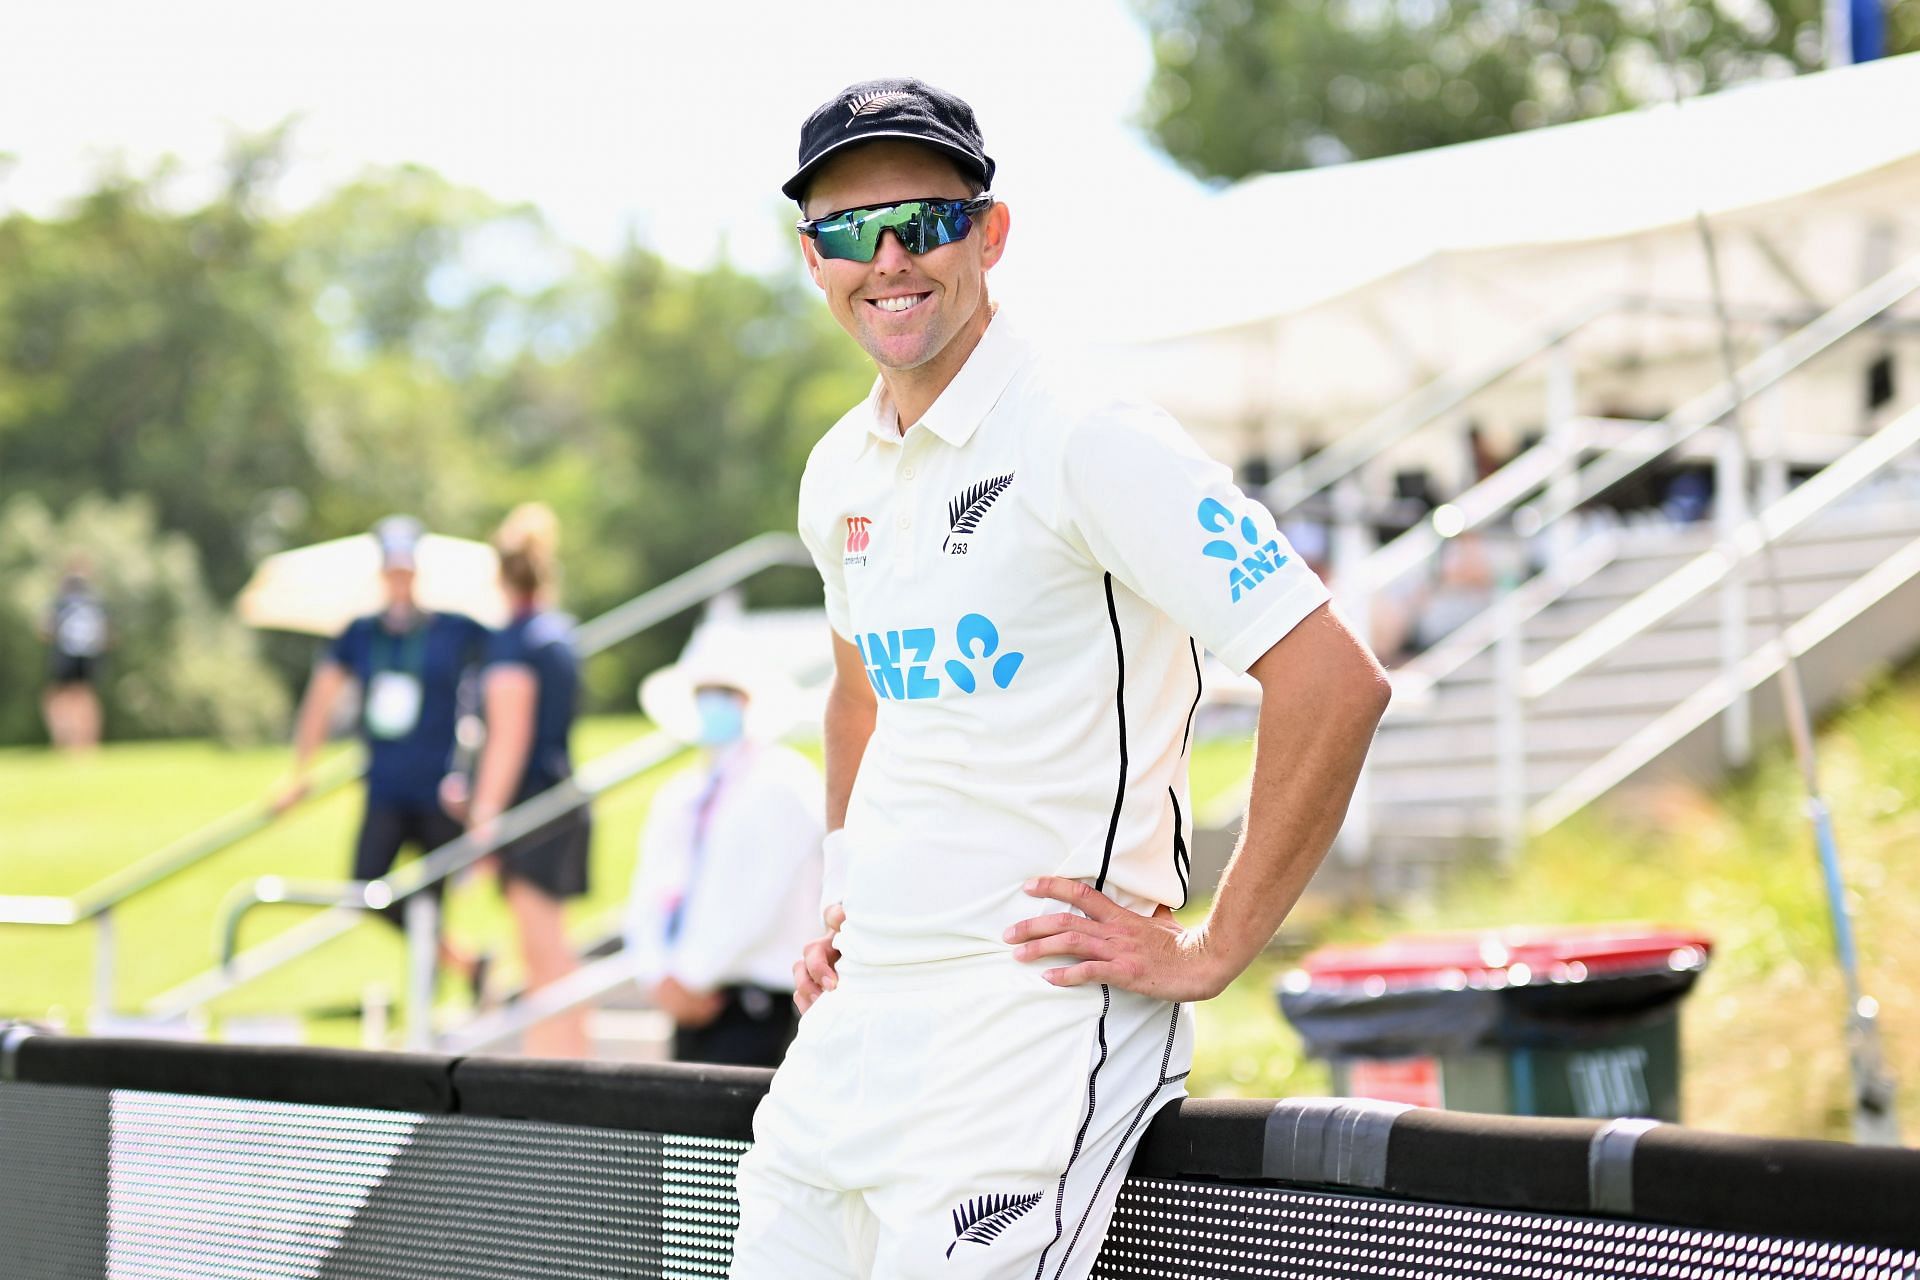 “I’d imagine that he will be selected for the T20 World Cup in Australia" - New Zealand Cricket CEO on the possibility of Trent Boult playing the tournament